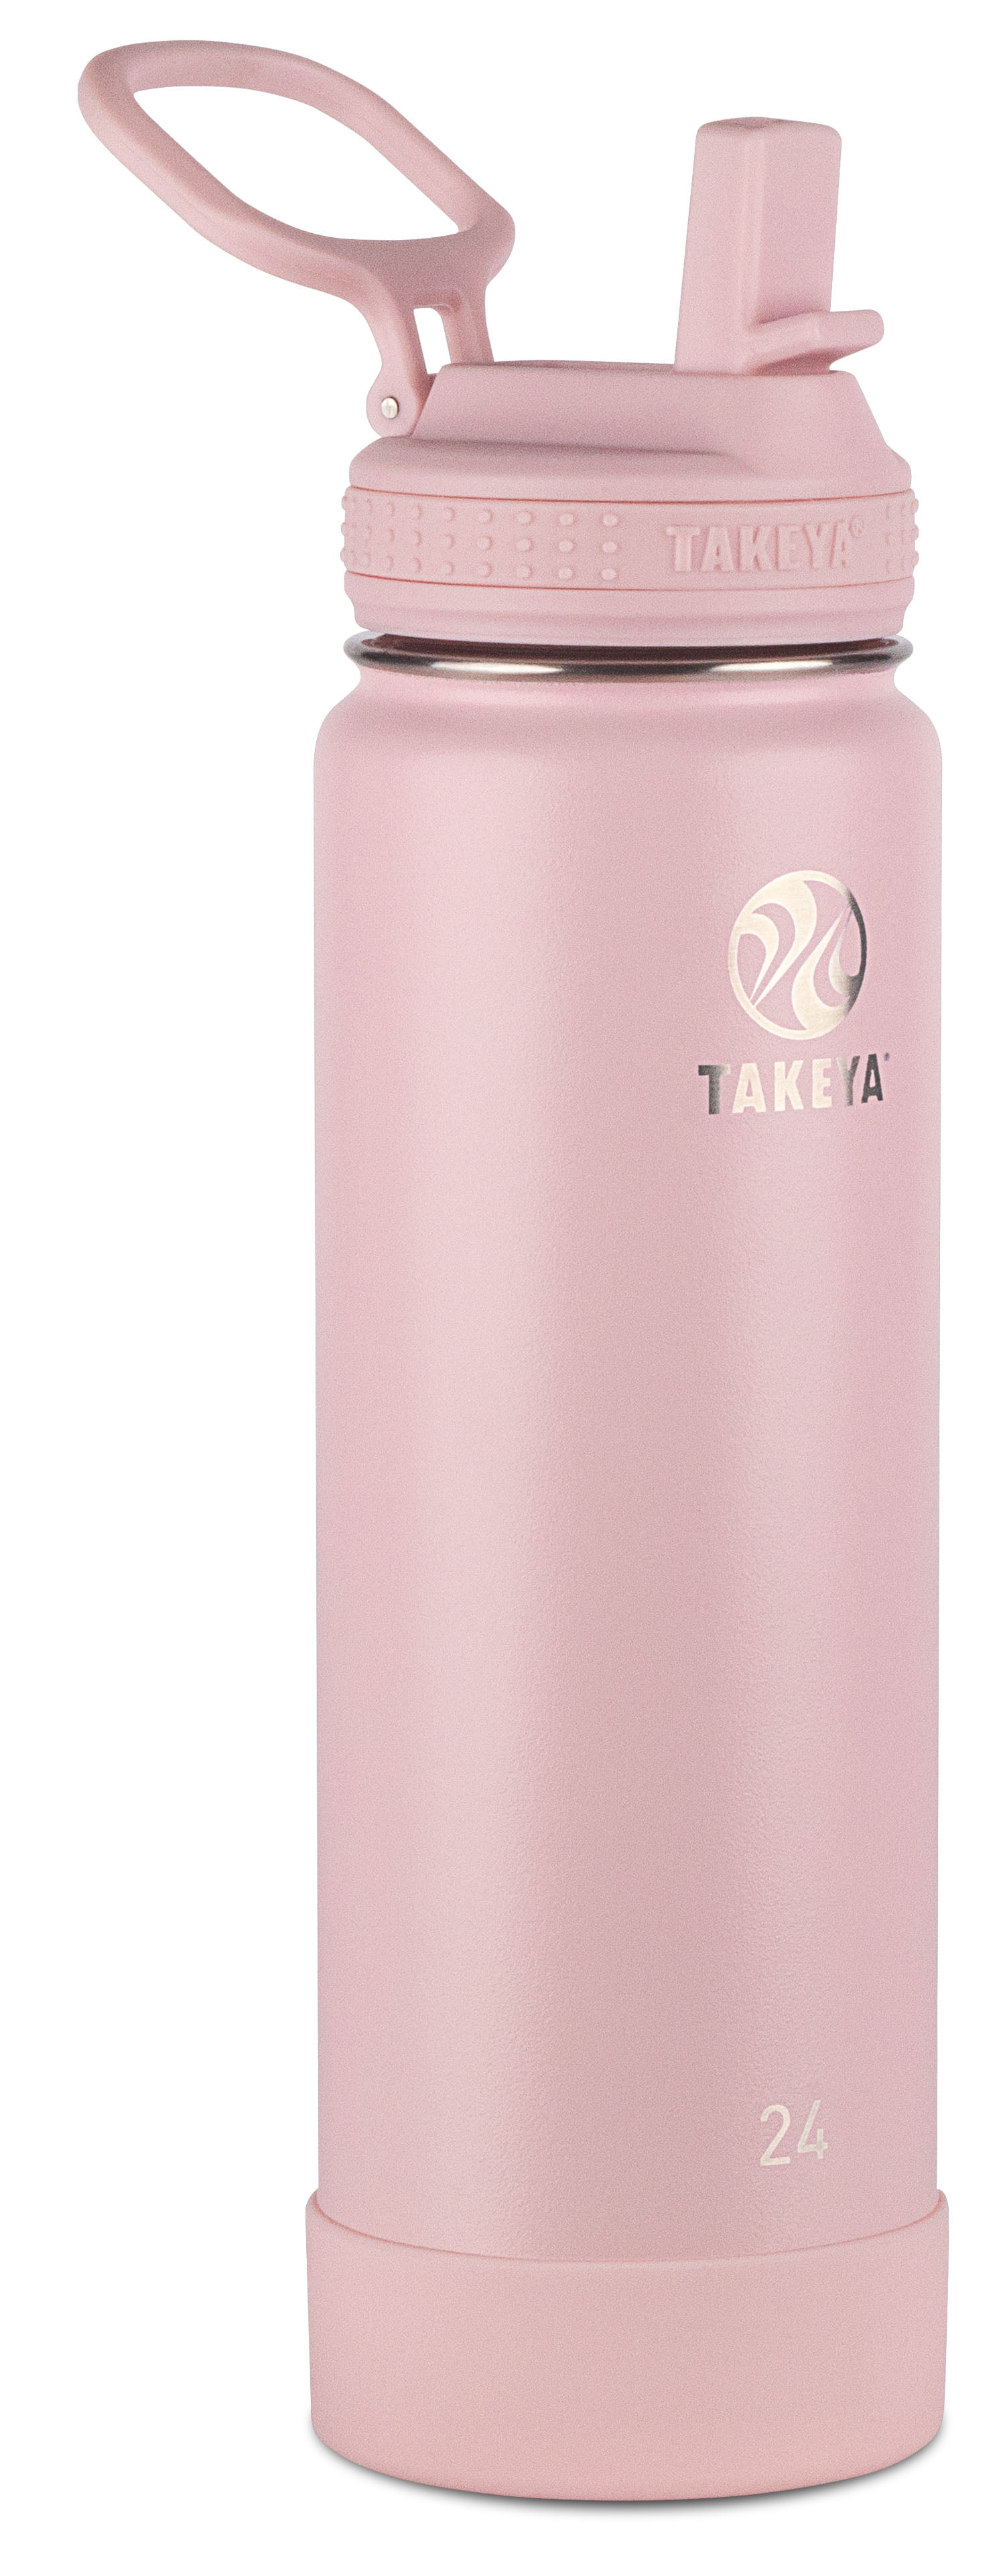 Takeya Actives Insulated Stainless Steel Spout Lid Water Bottle - Arctic, 24  oz - Kroger